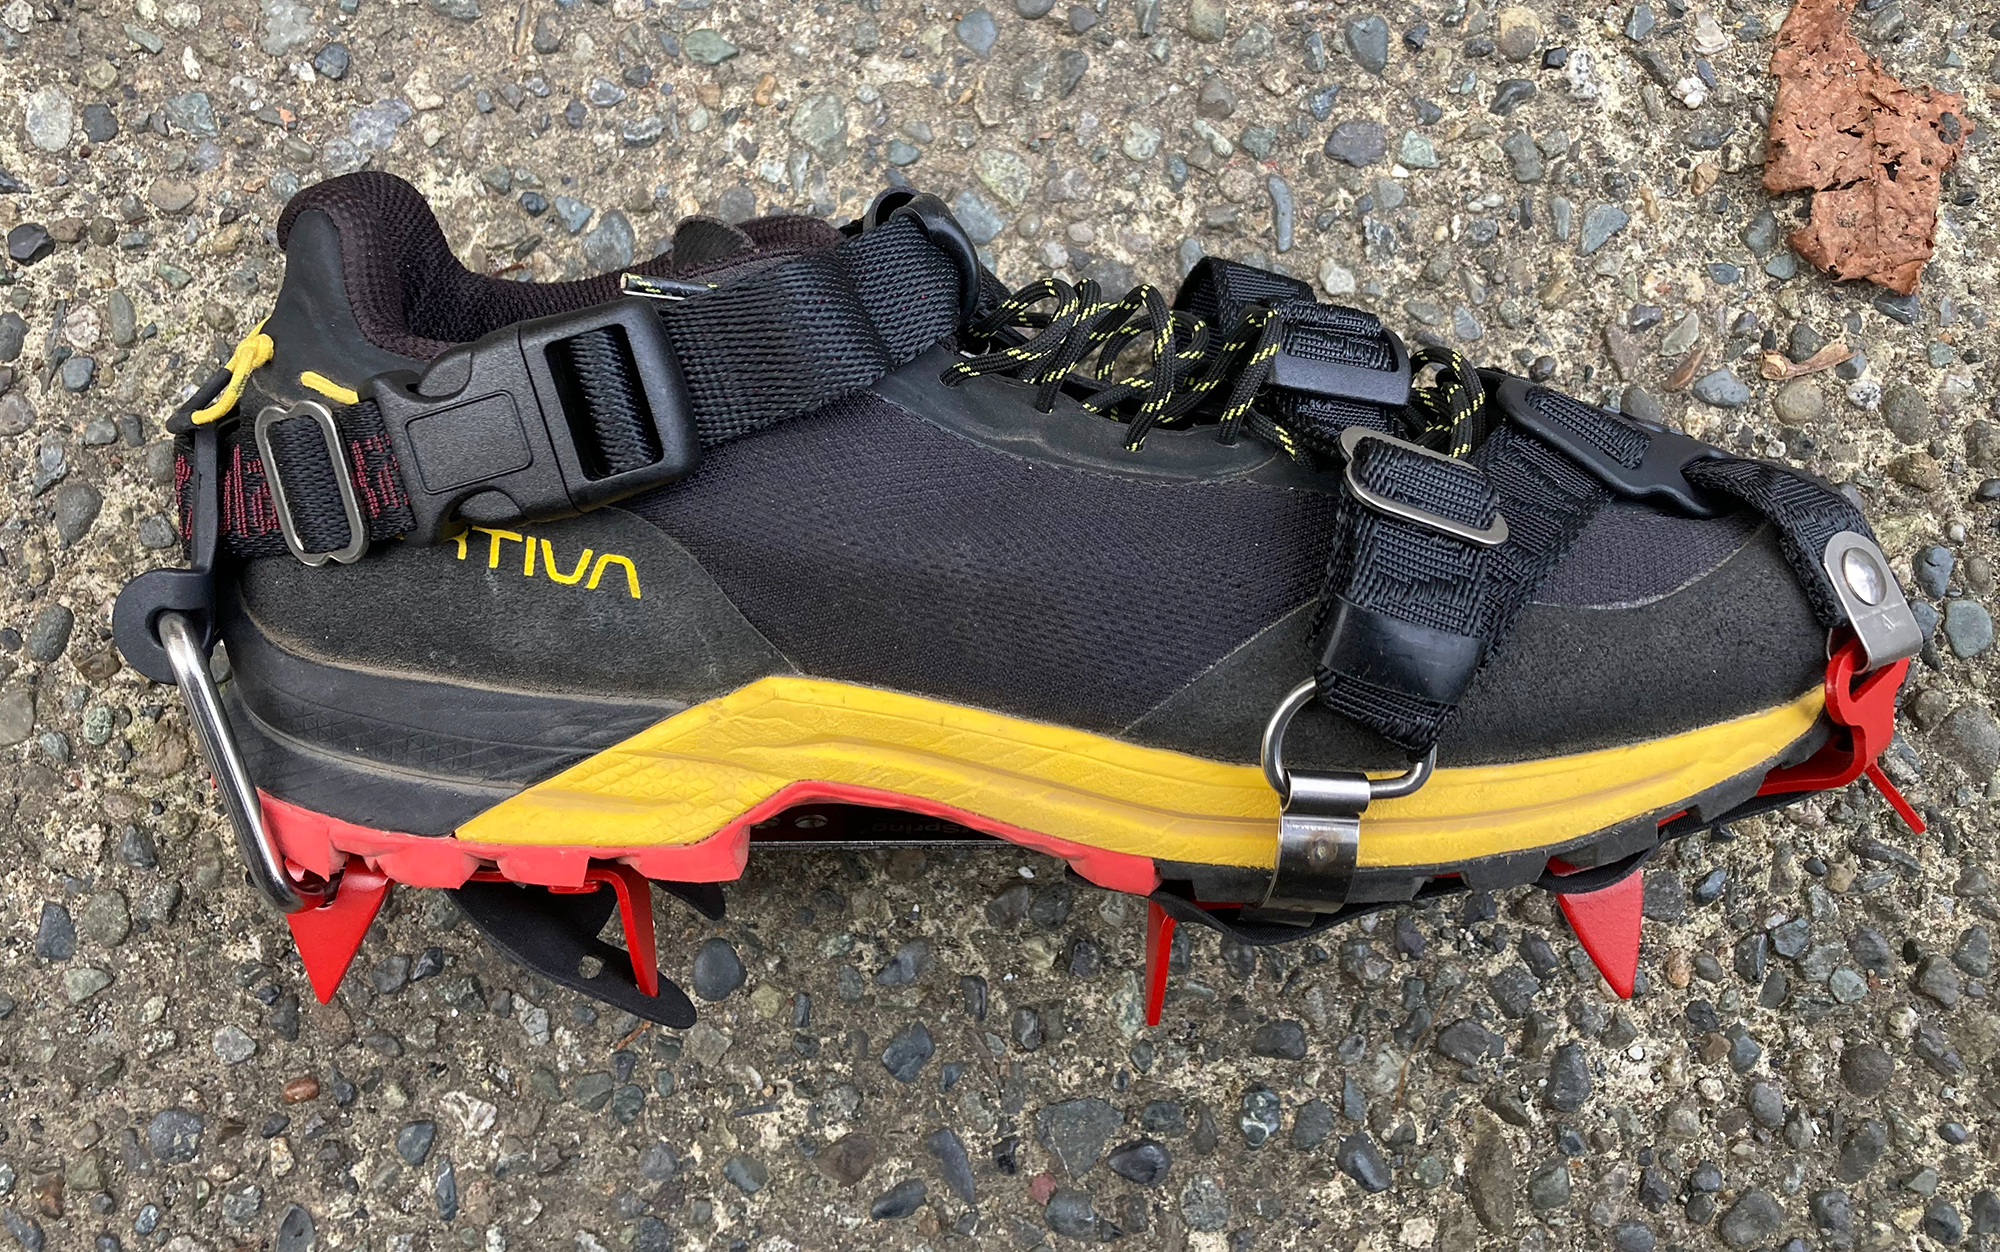 The straps of the Kahtoola crampons secure to any hiking shoe.